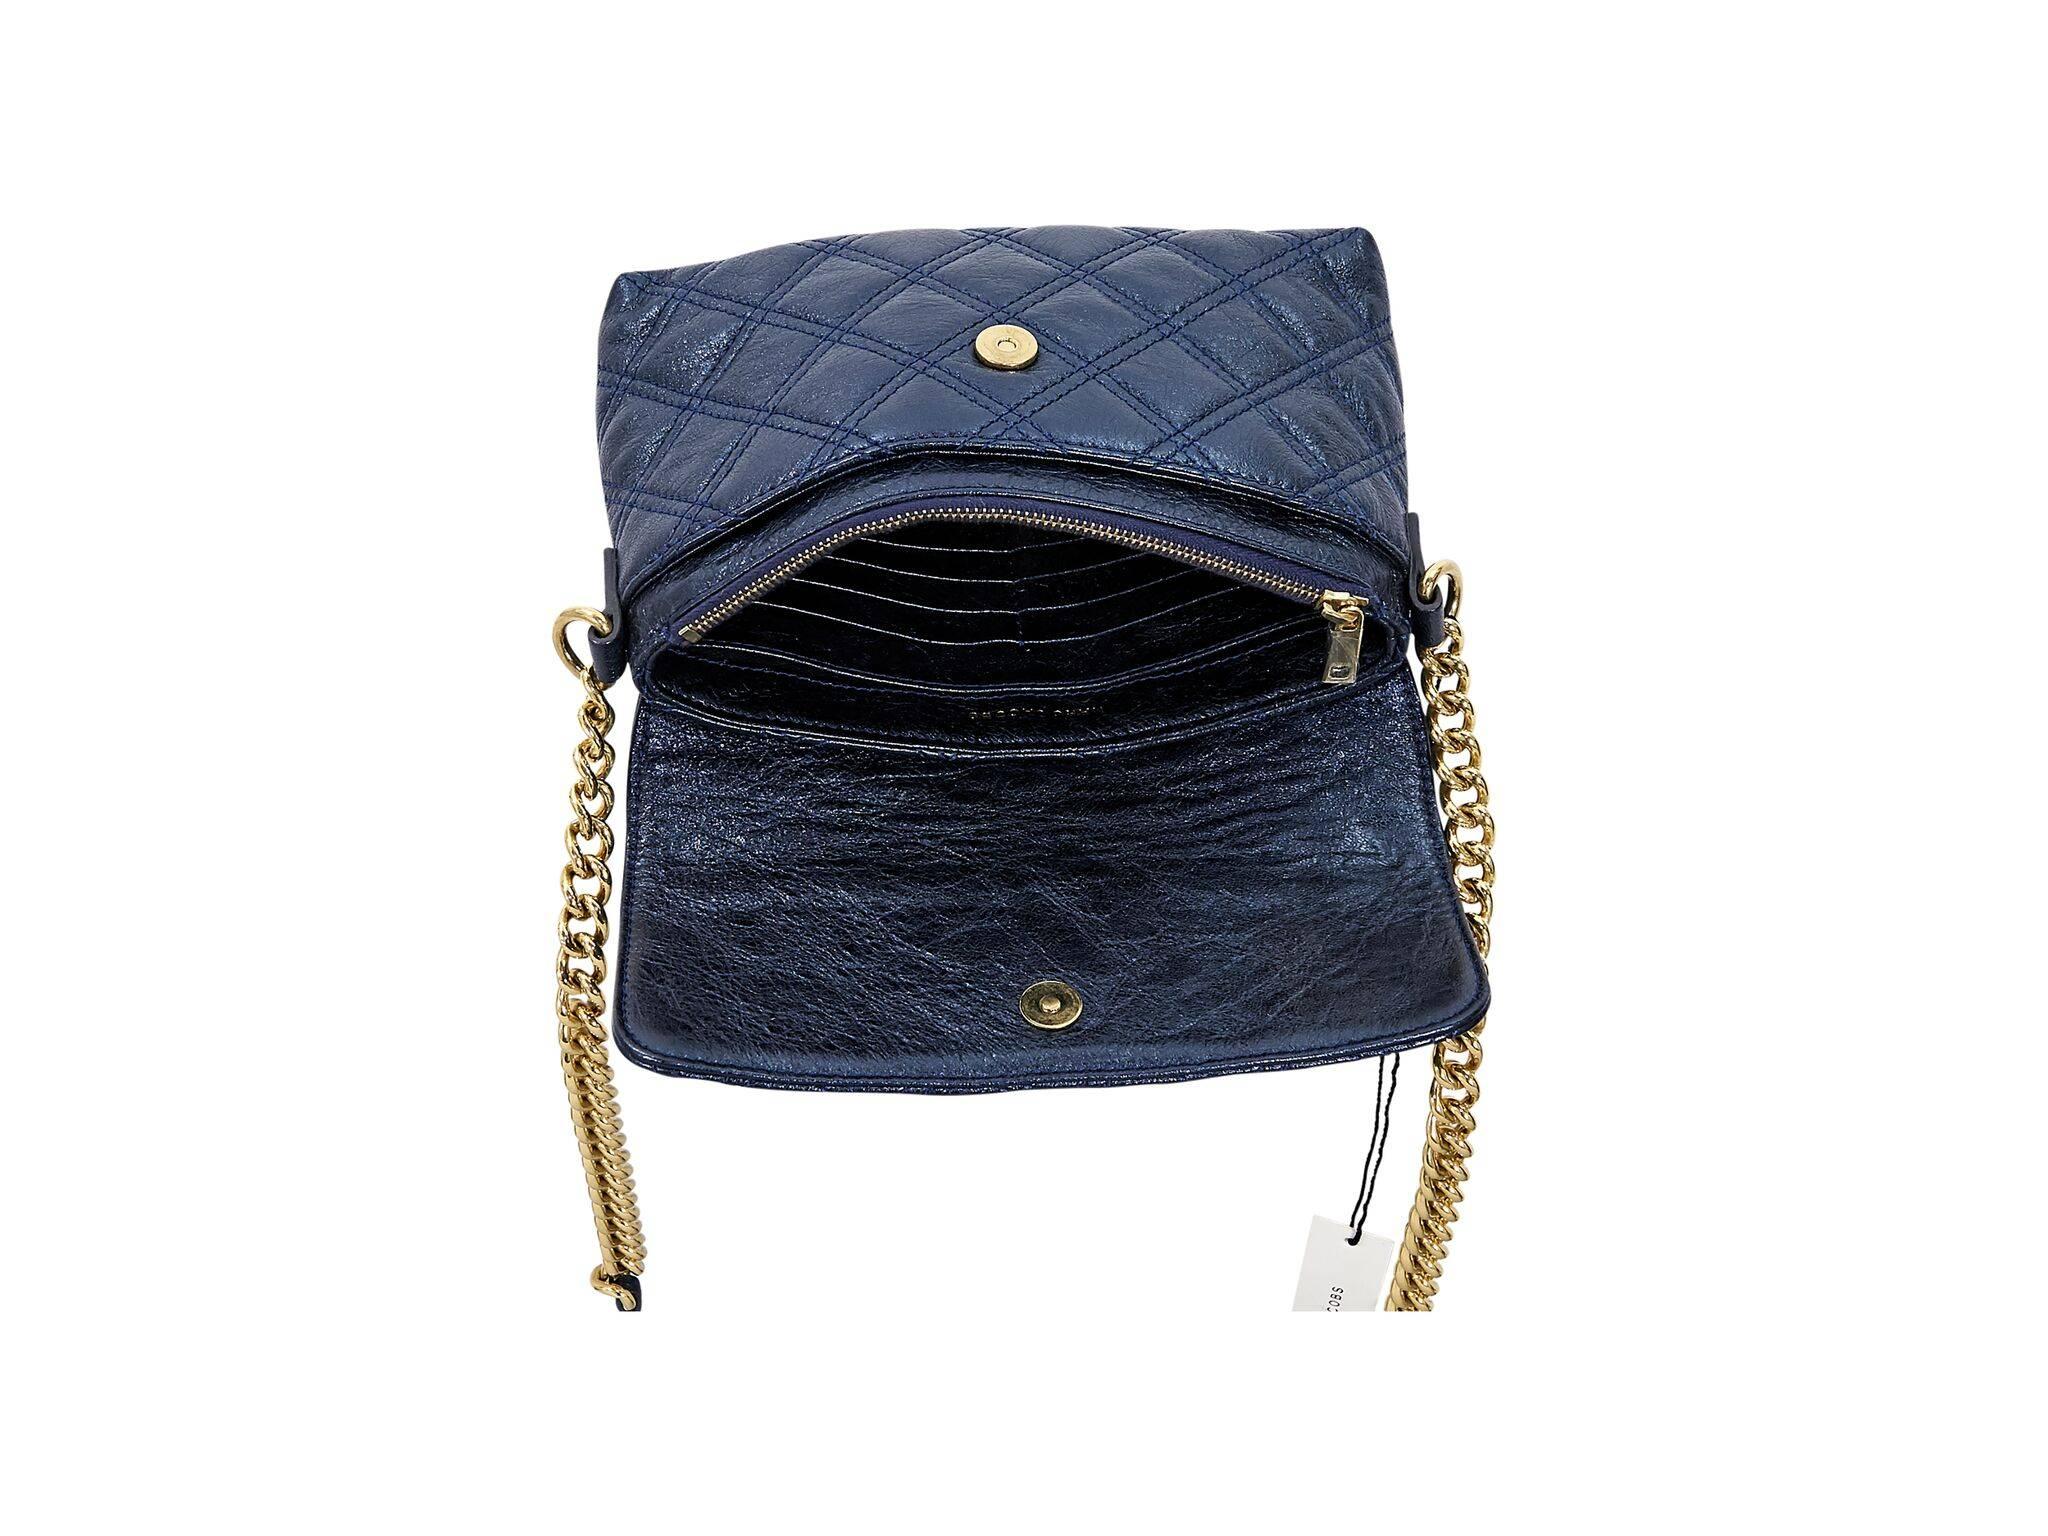 Product details:  Metallic blue quilted leather crossbody bag by Marc Jacobs.  Accented with a faux push-lock closure.  Chain and leather crossbody strap.  Front flap with magnetic zip closure.  Lined interior with multiple inner credit card slots